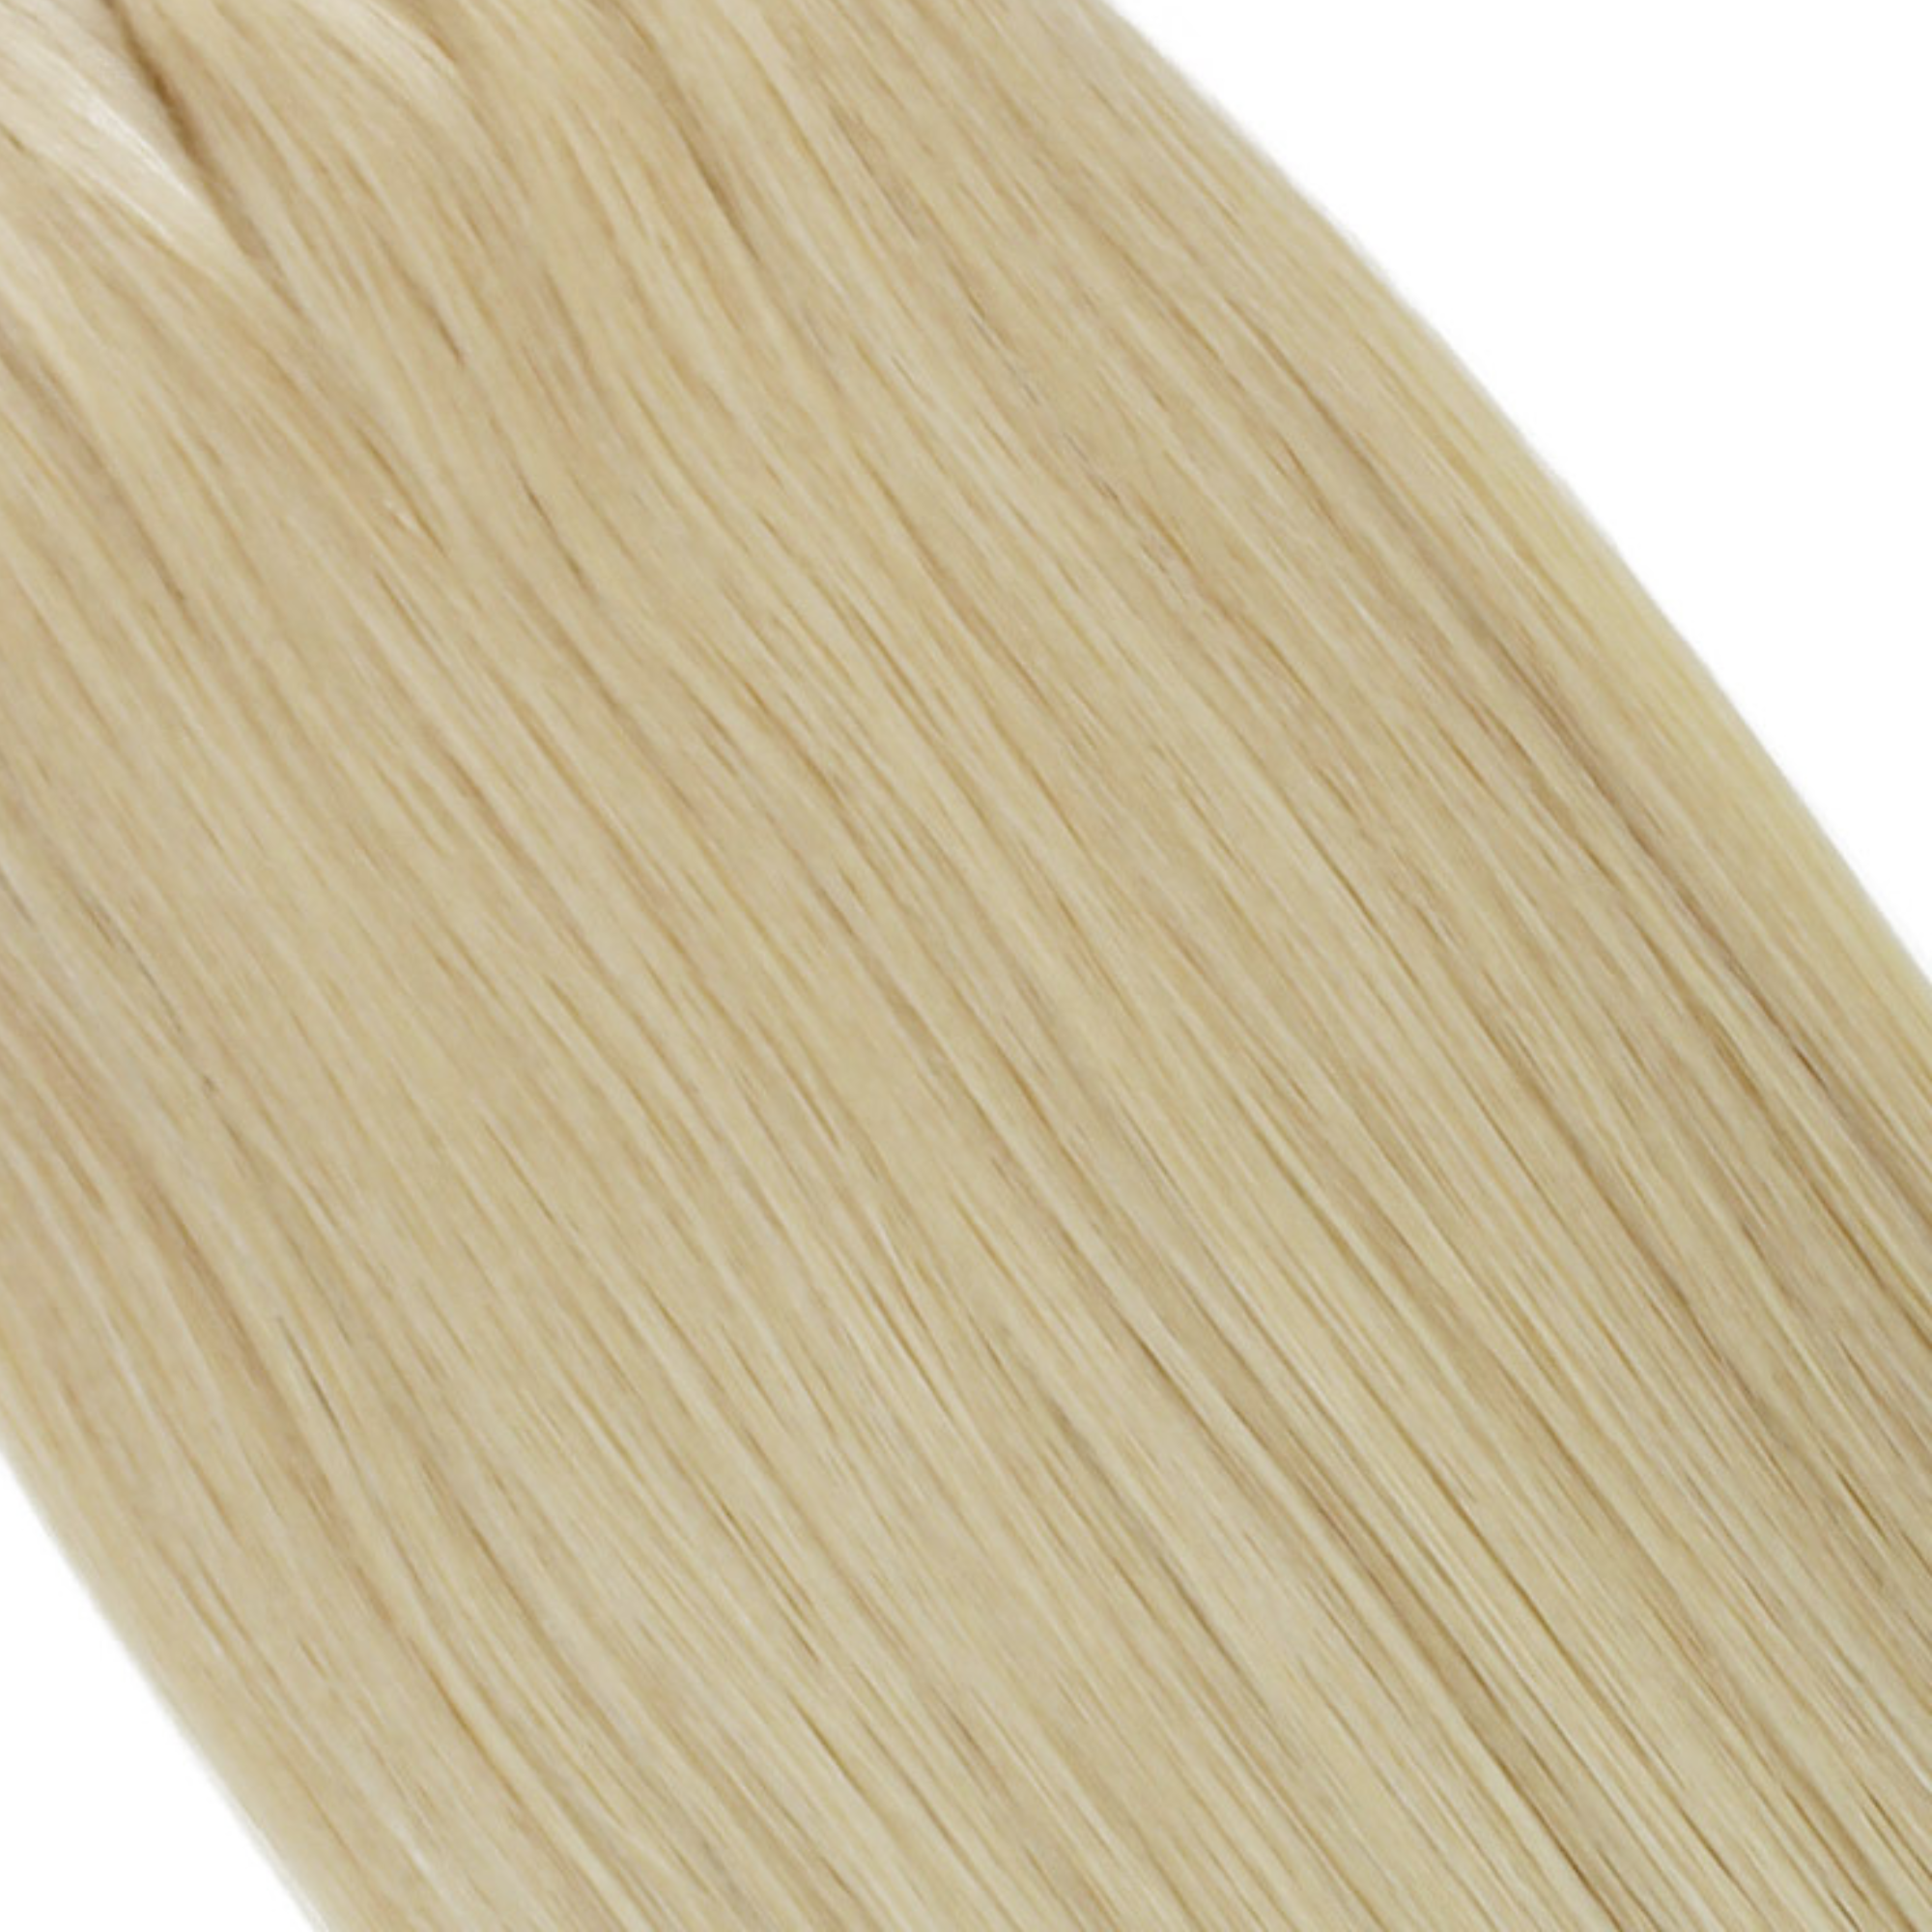 "hair rehab london 22" weft hair extensions shade swatch titled platinum"